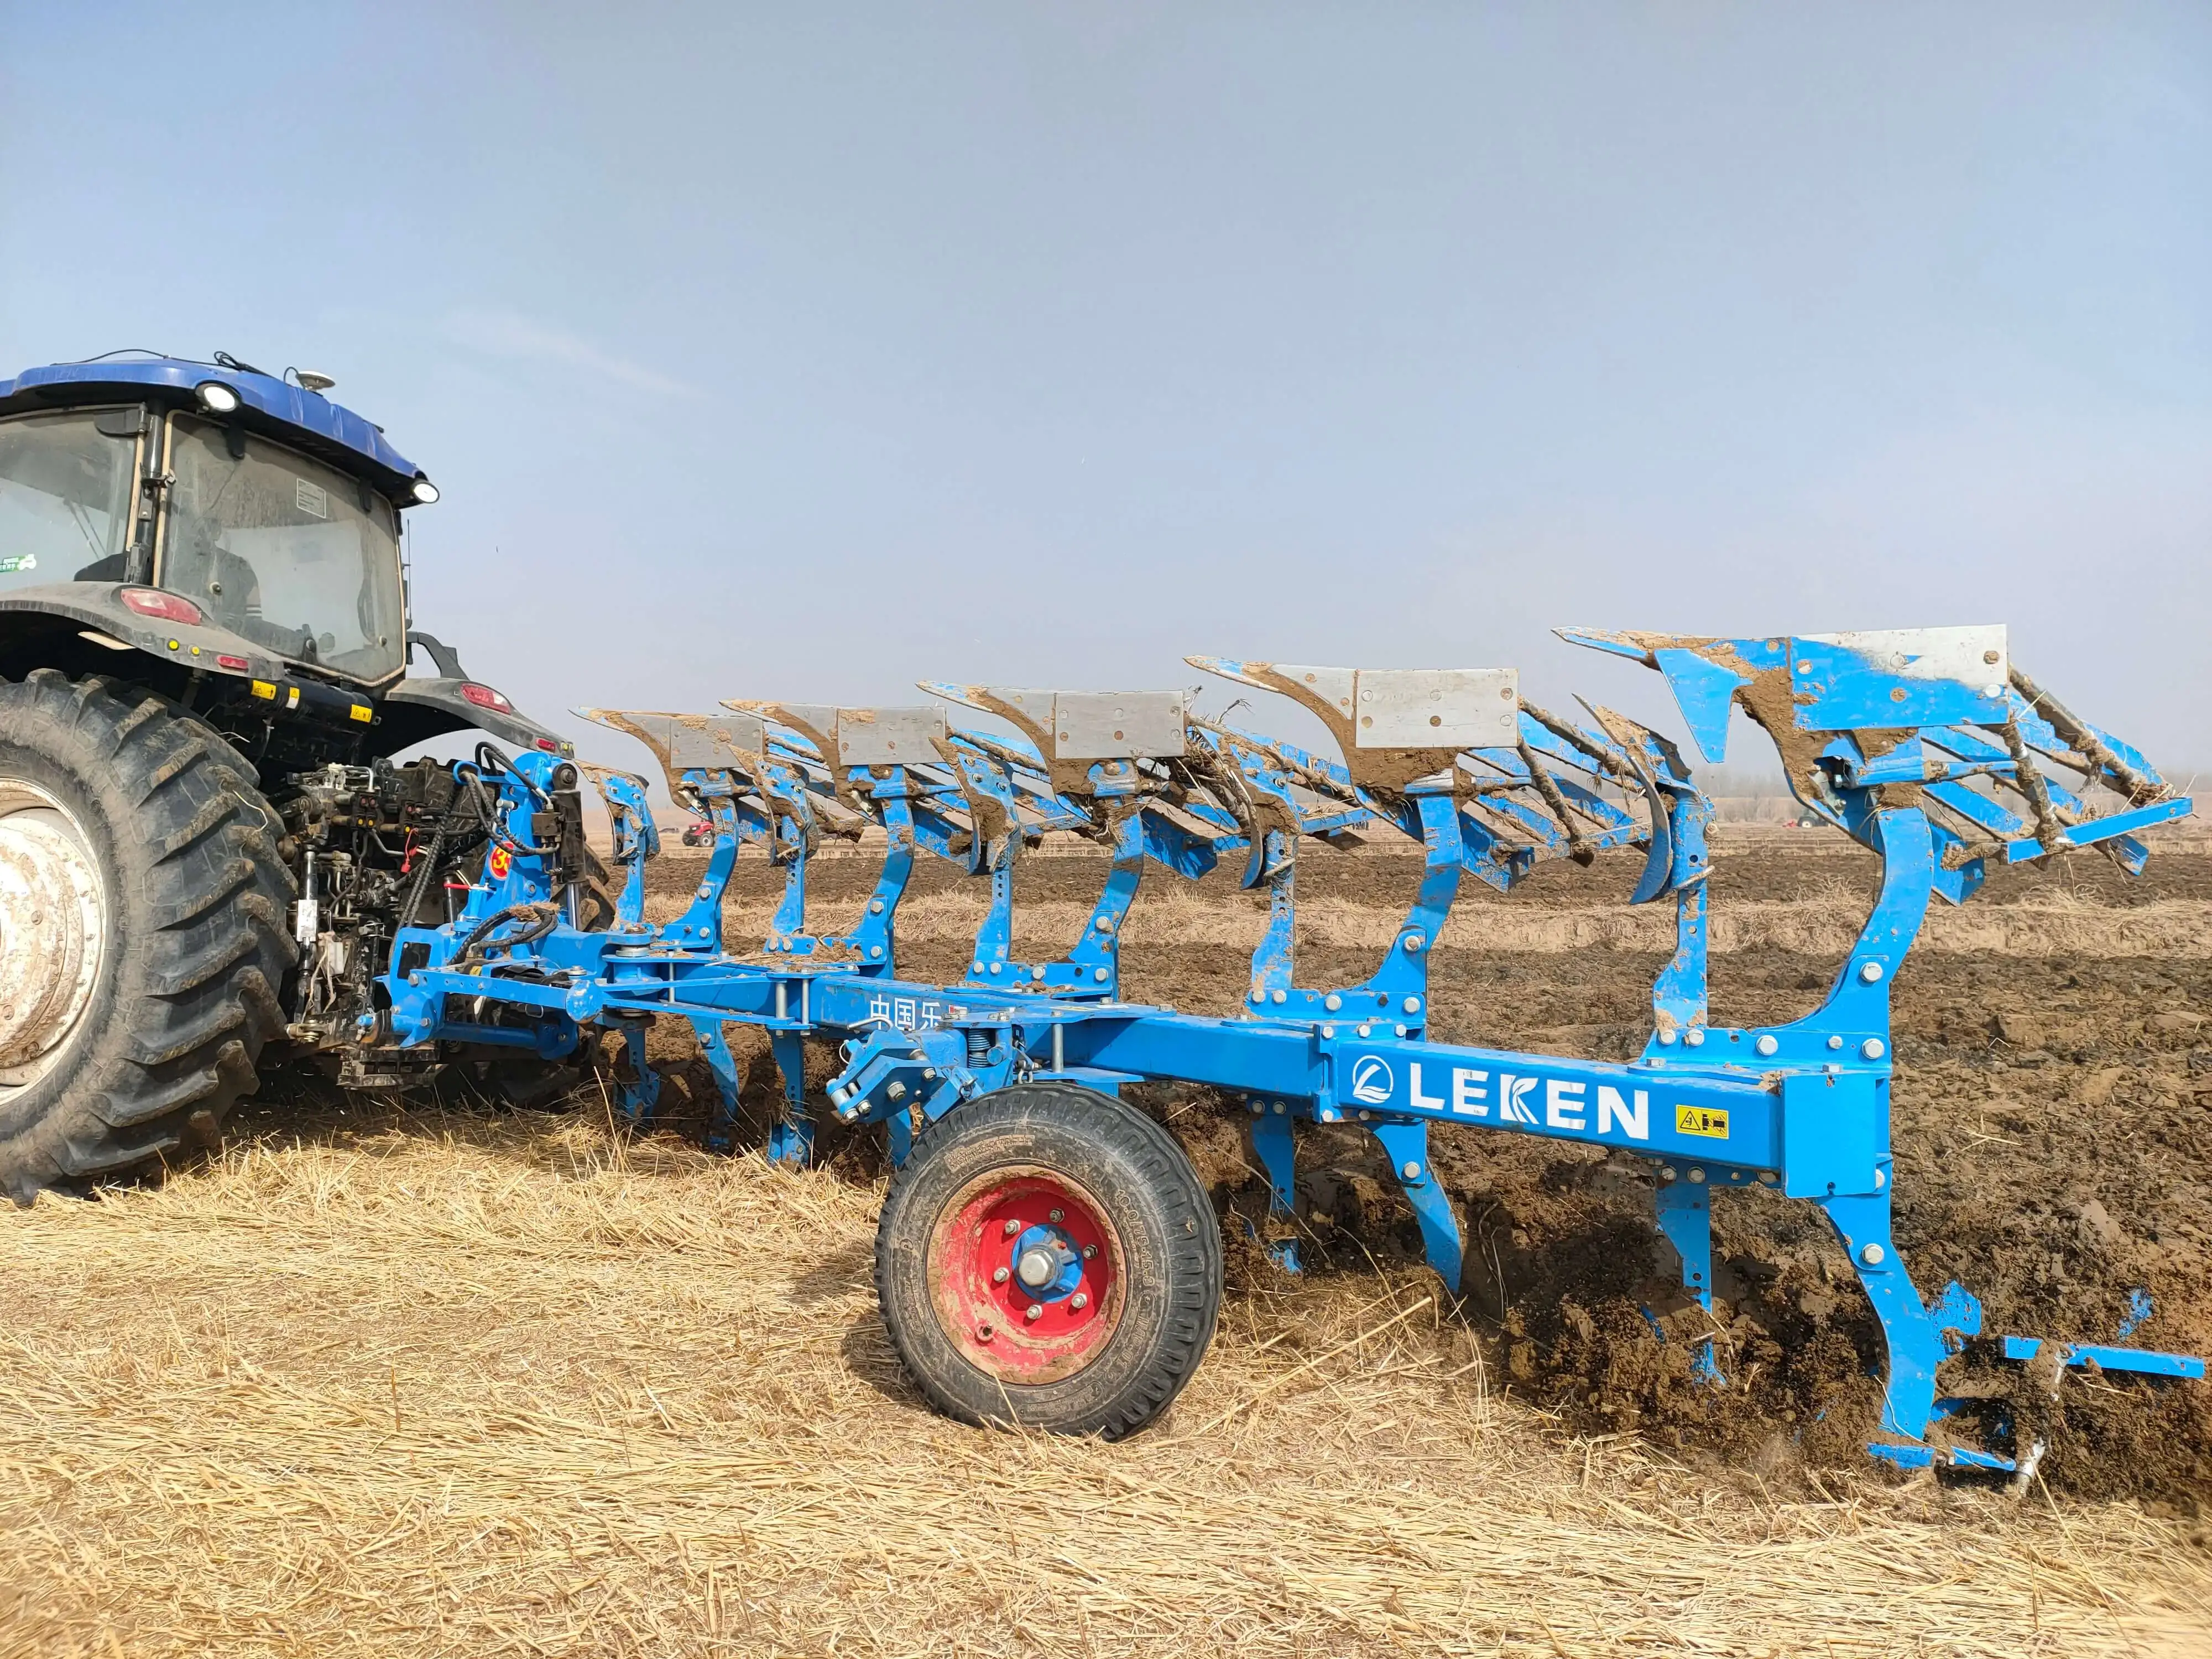 Reversible Plough: Enhancer of Agricultural Productivity